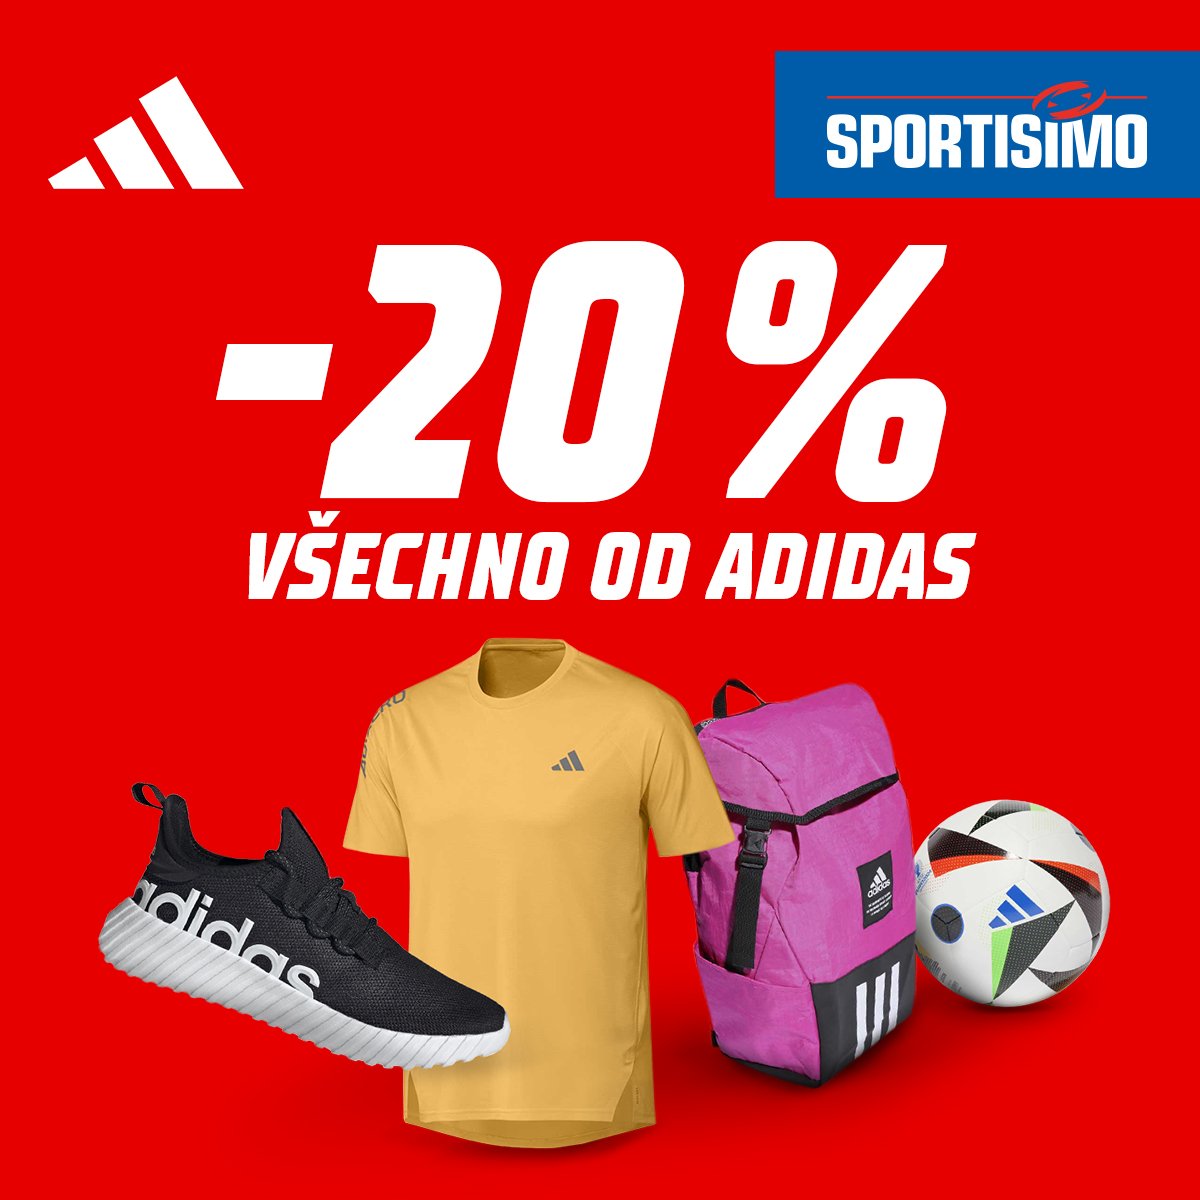 20% off everything from Adidas